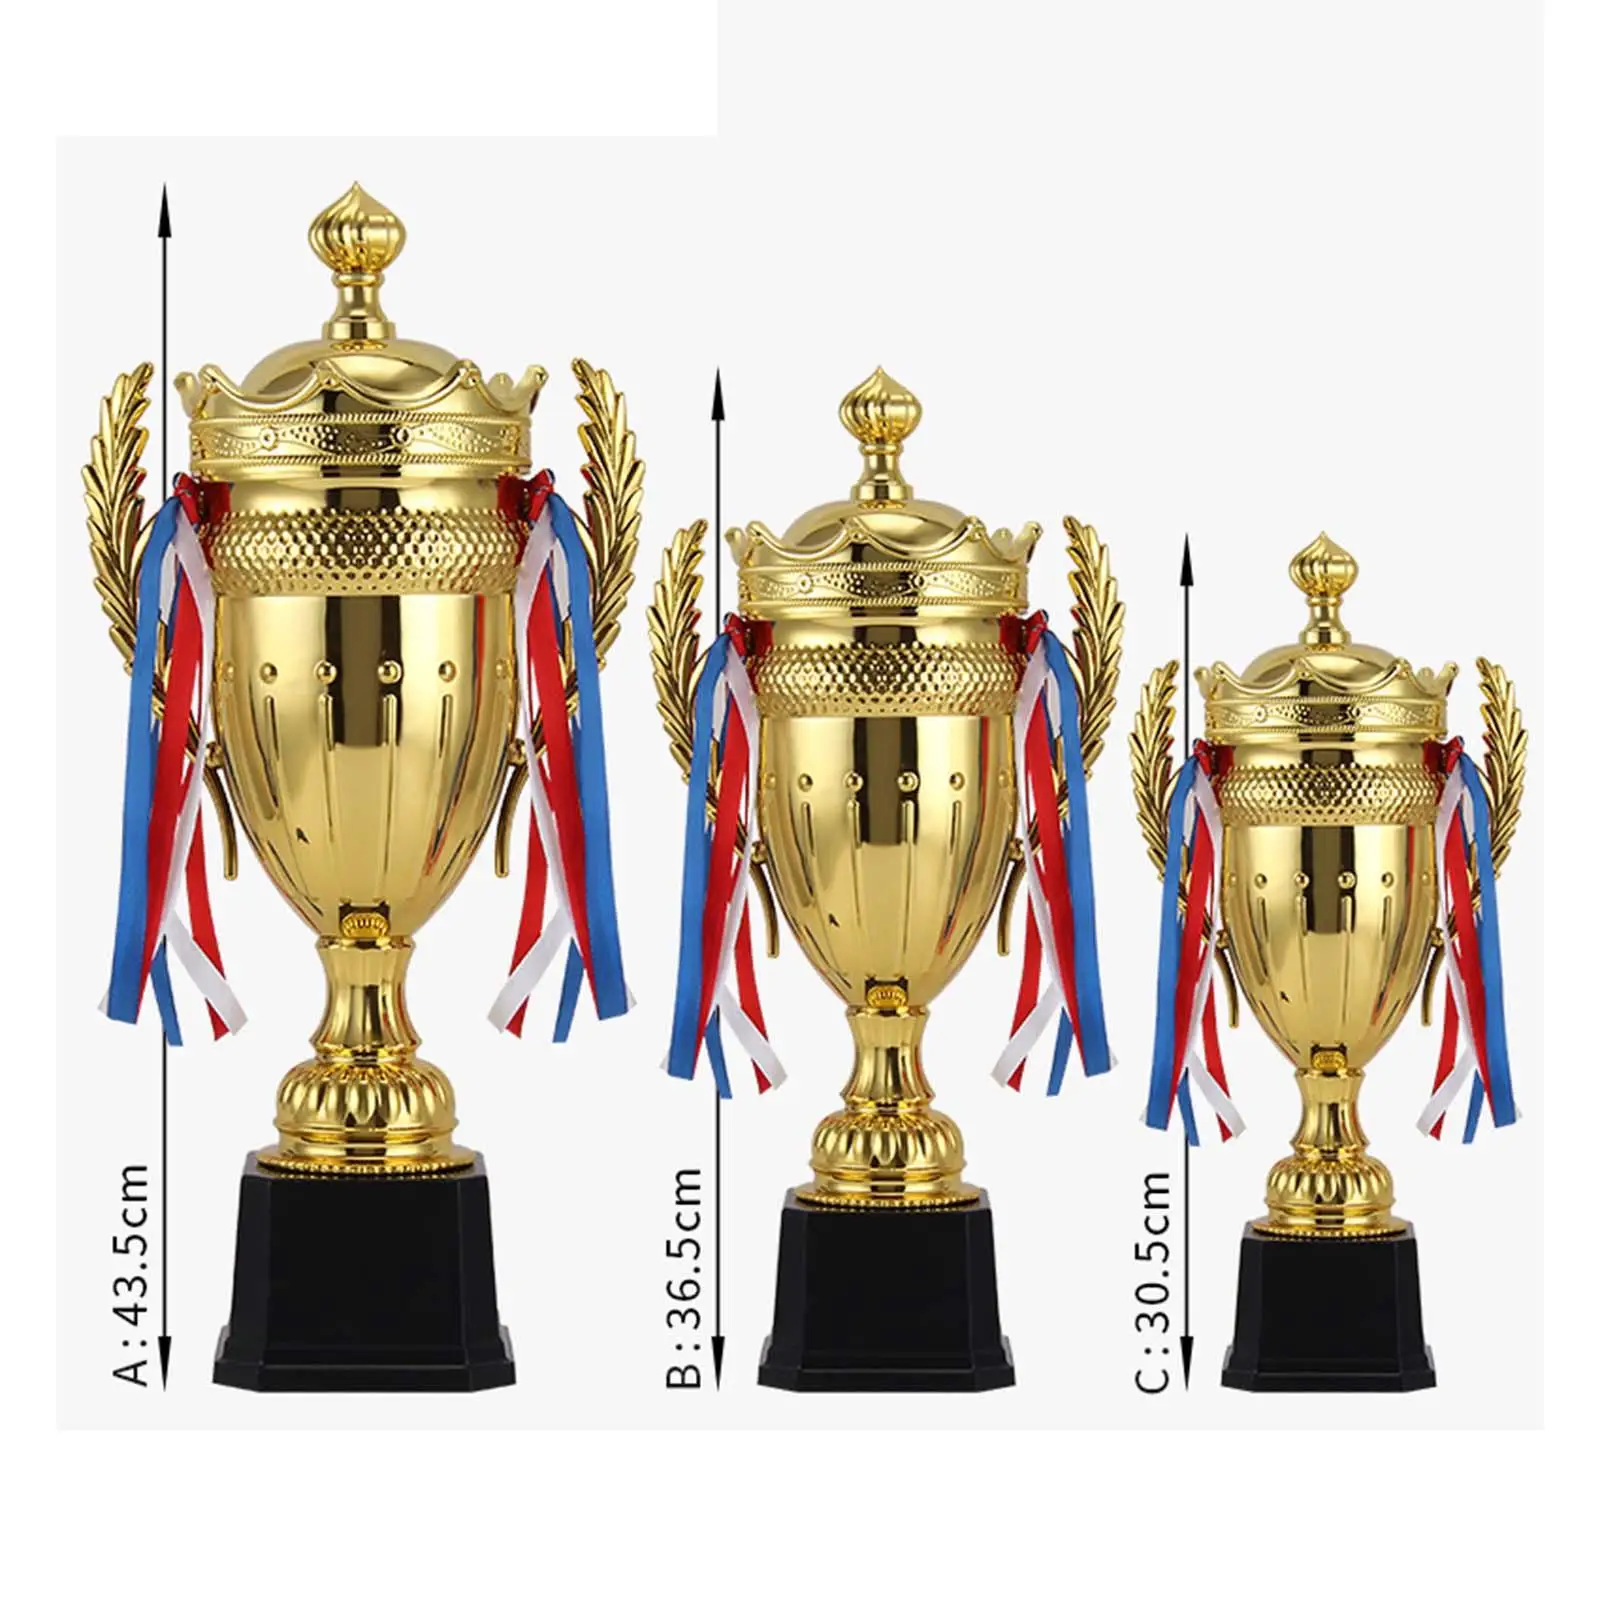 Adults Trophy Creative Trophy Cup Award Trophy Cup for Competitions Sports Championships Celebrations Party Favors